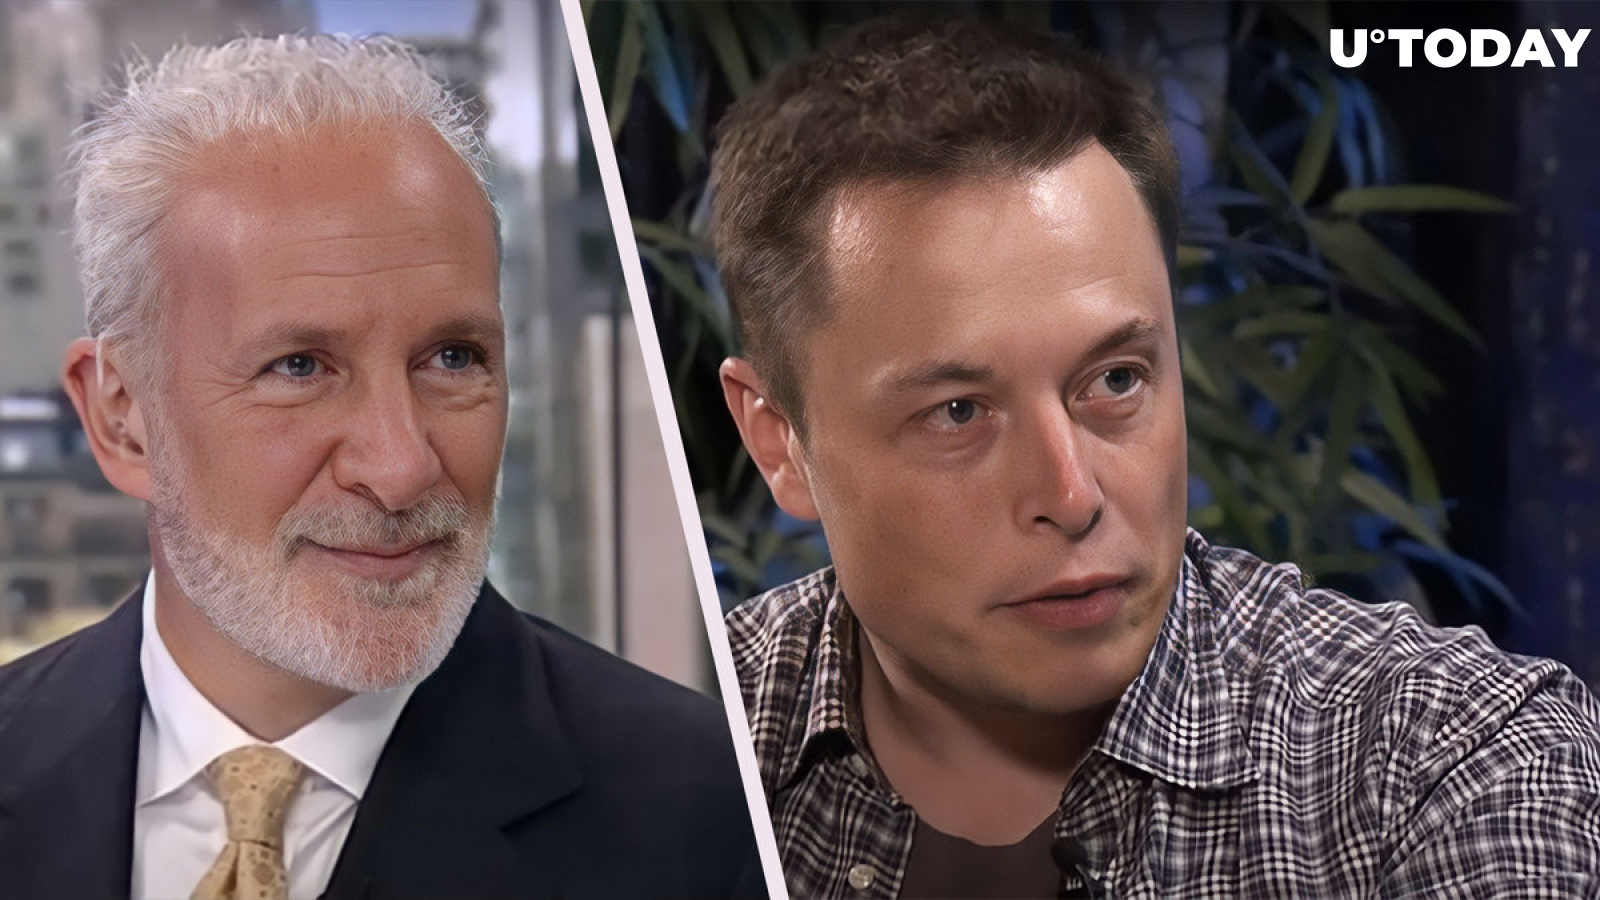 Crypto Hater Peter Schiff Gives Elon Musk Investment Advice